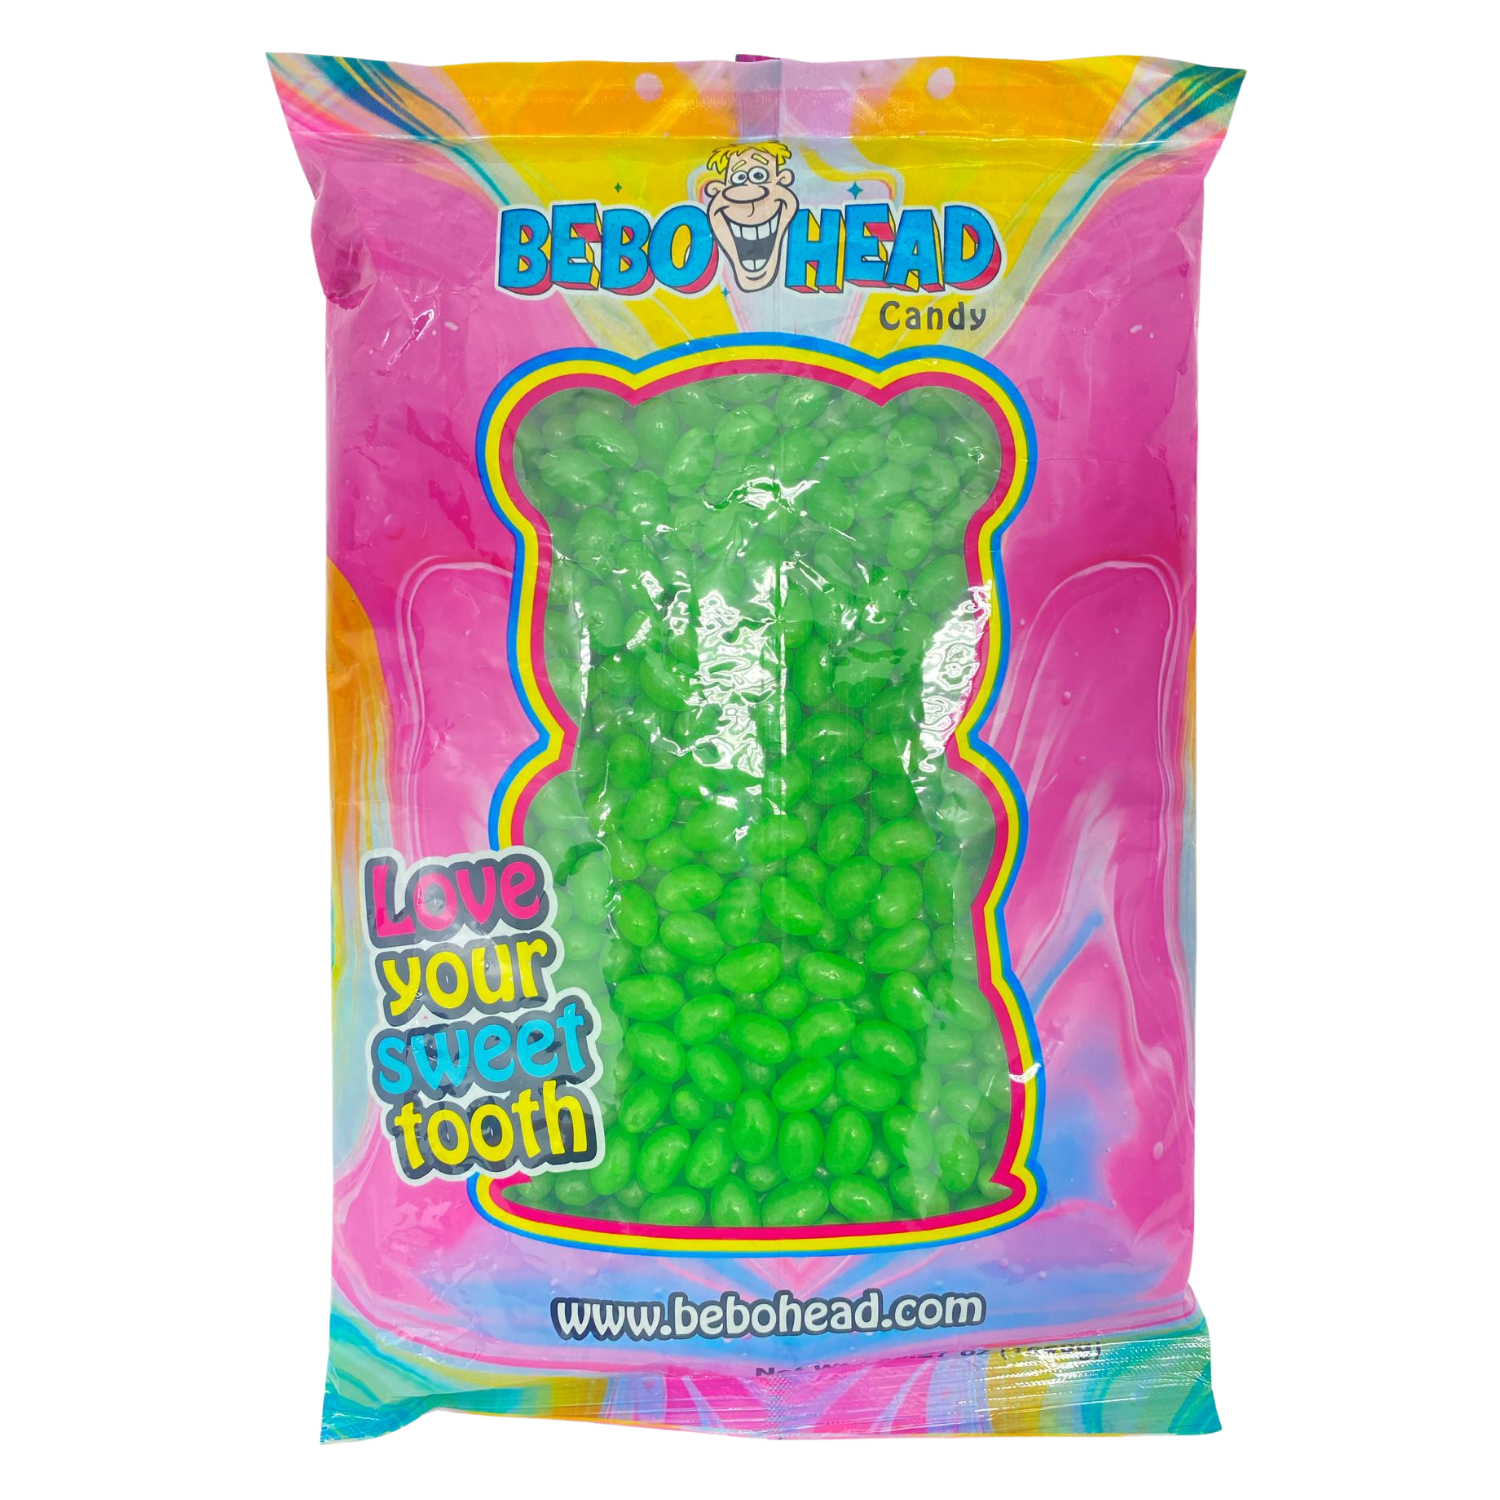 Green Apple Jelly Beans - 2.2 Pounds